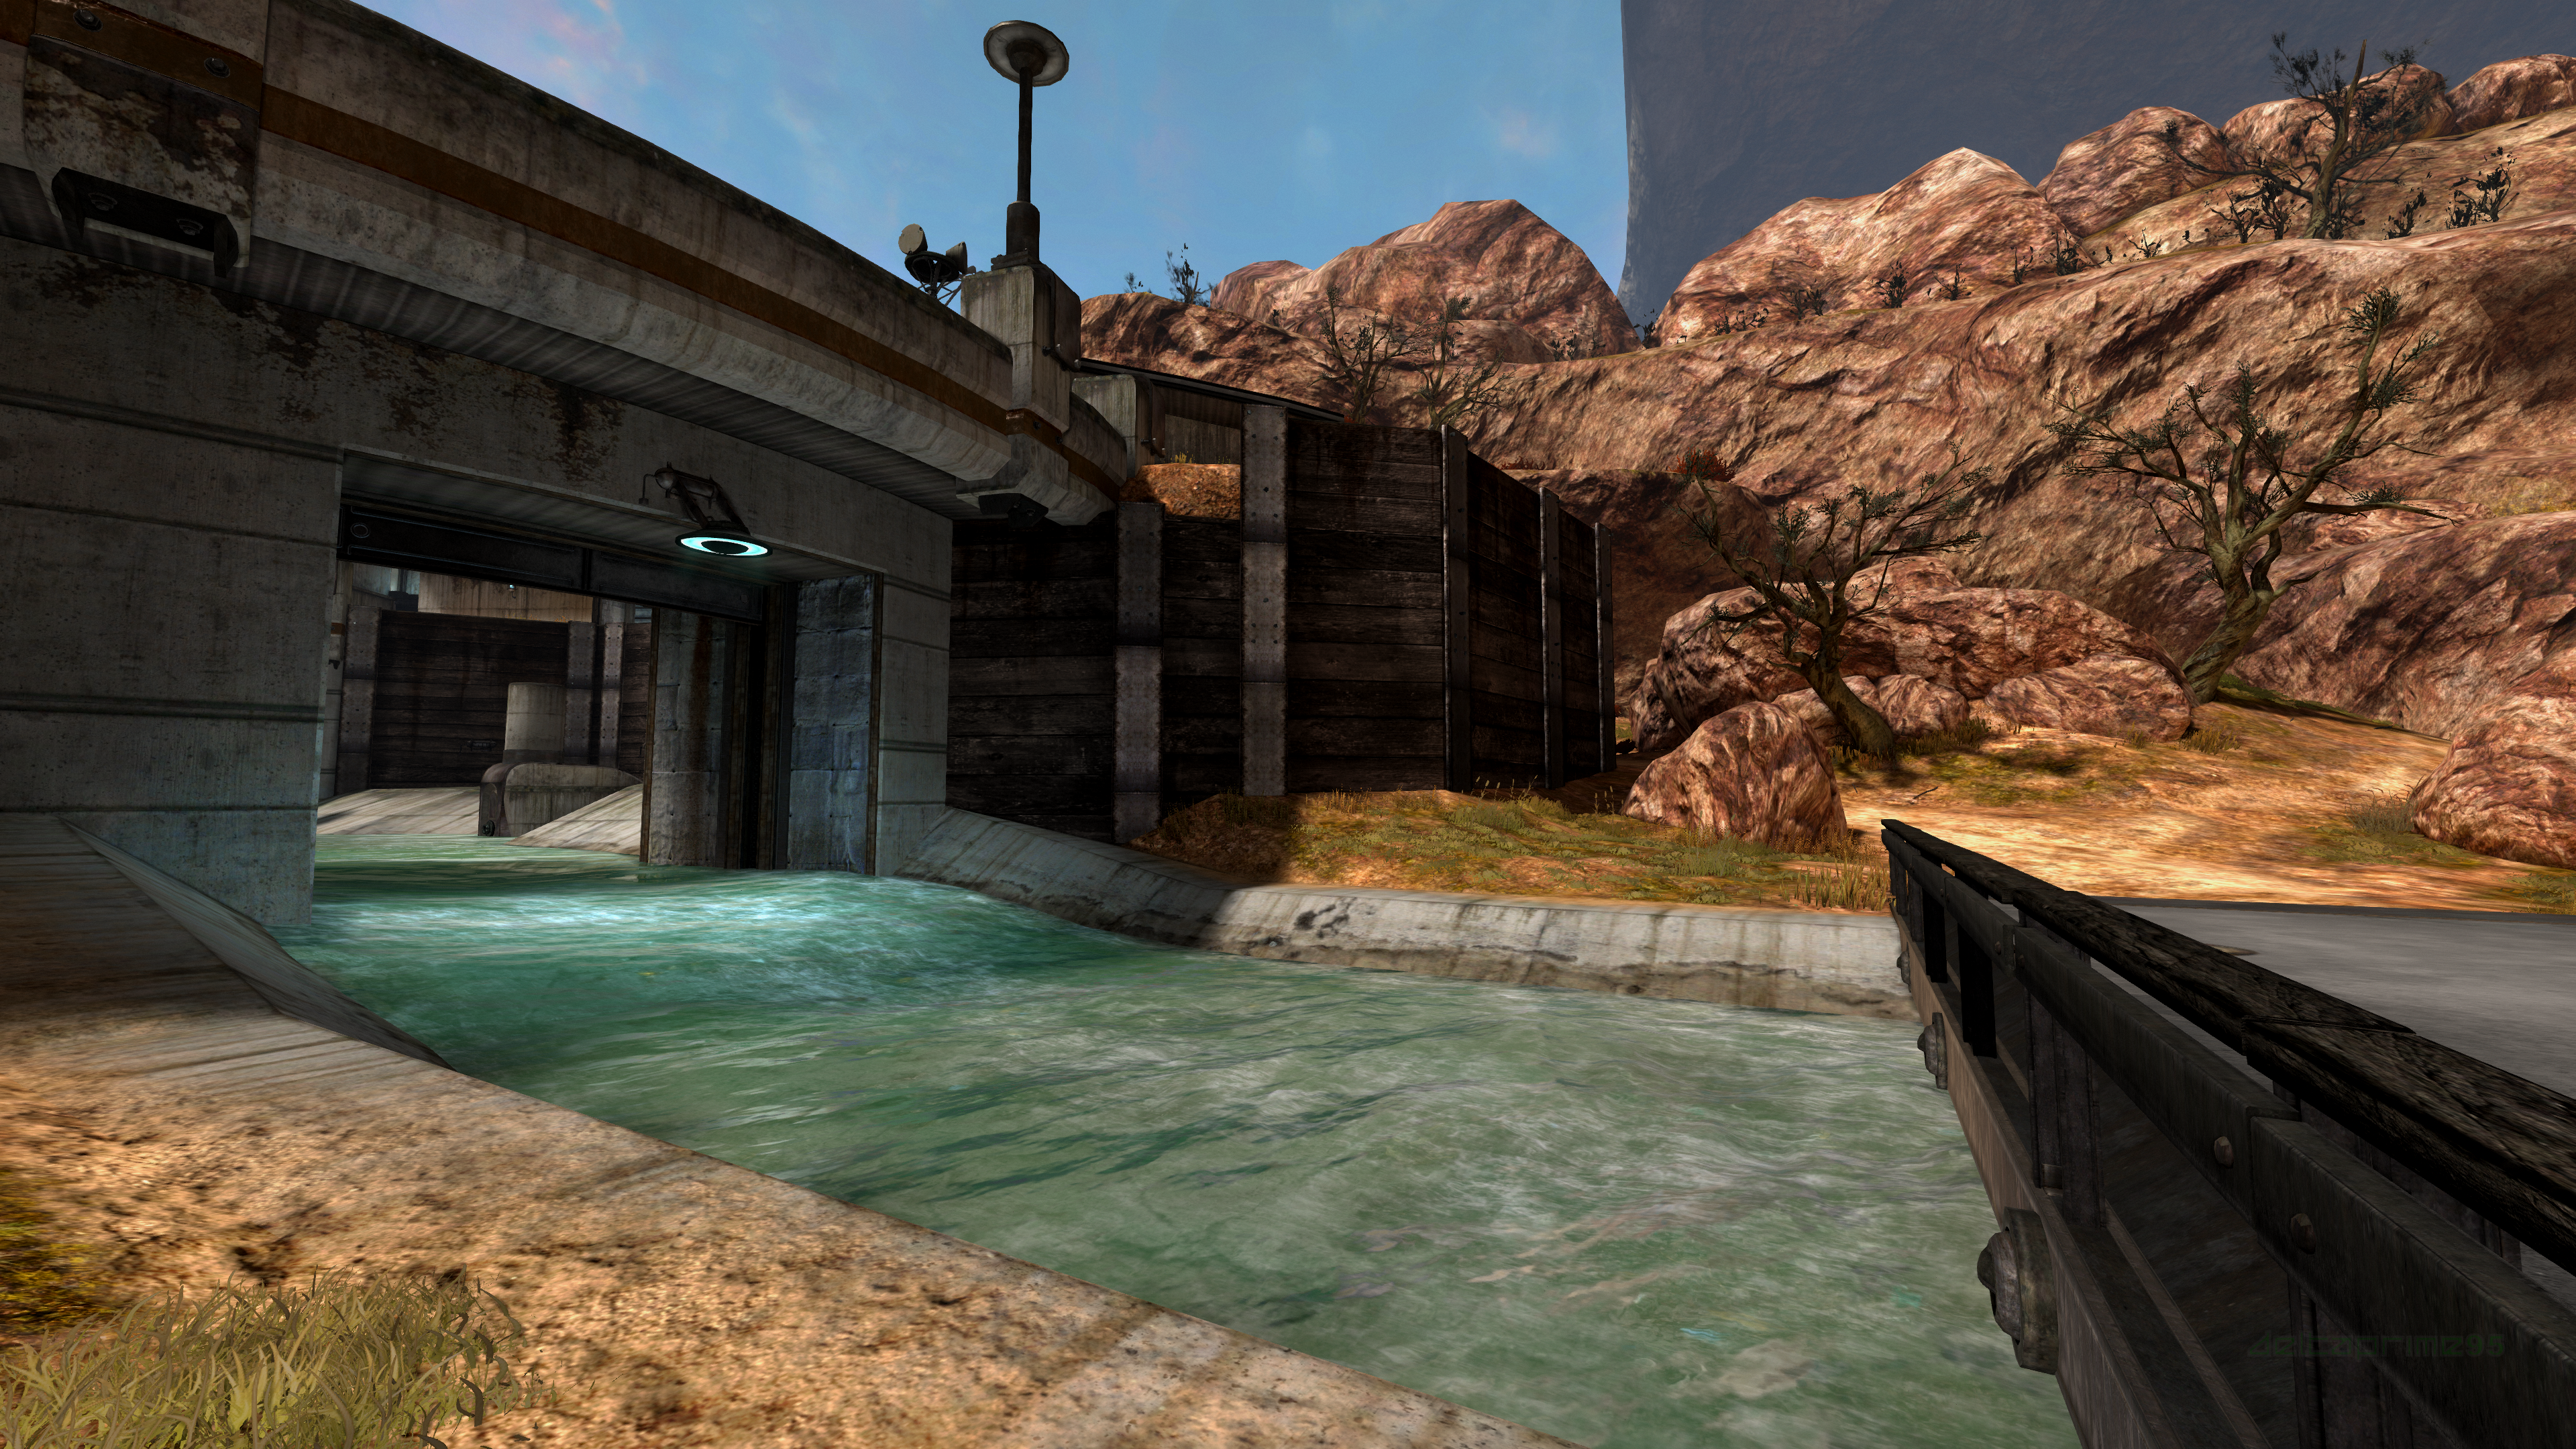 PC Gaming Screen Shot In Game Halo Reach Planet Reach Powerhouse Multiplayer Map Dam Water Hydroelec 3840x2160